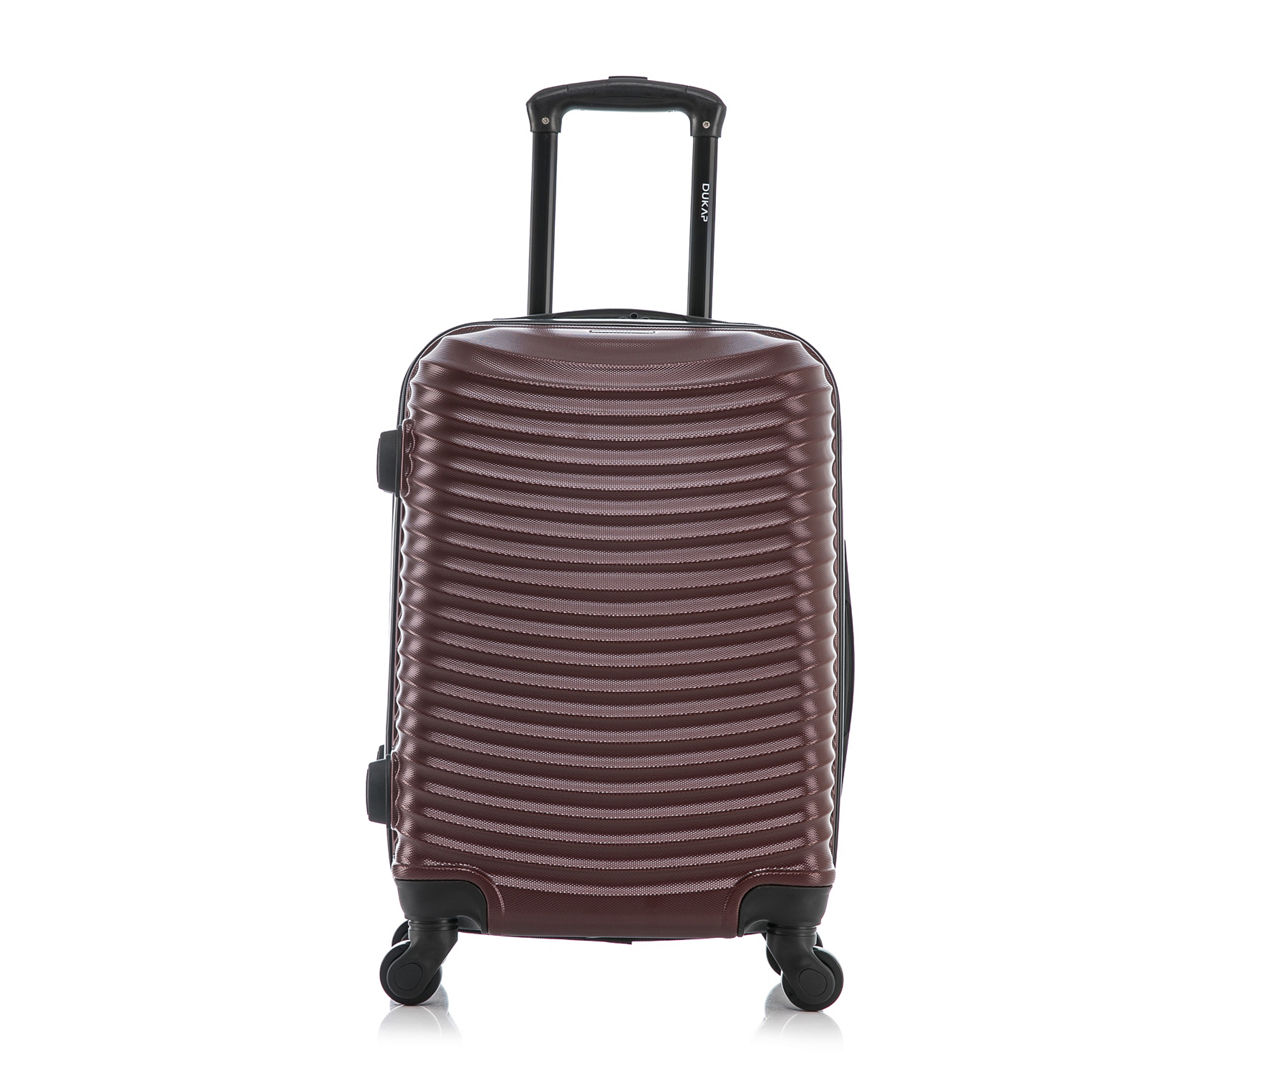 DUKAP Adly Wine 20" Curved-Ridge Hardside Spinner Carry-On Suitcase